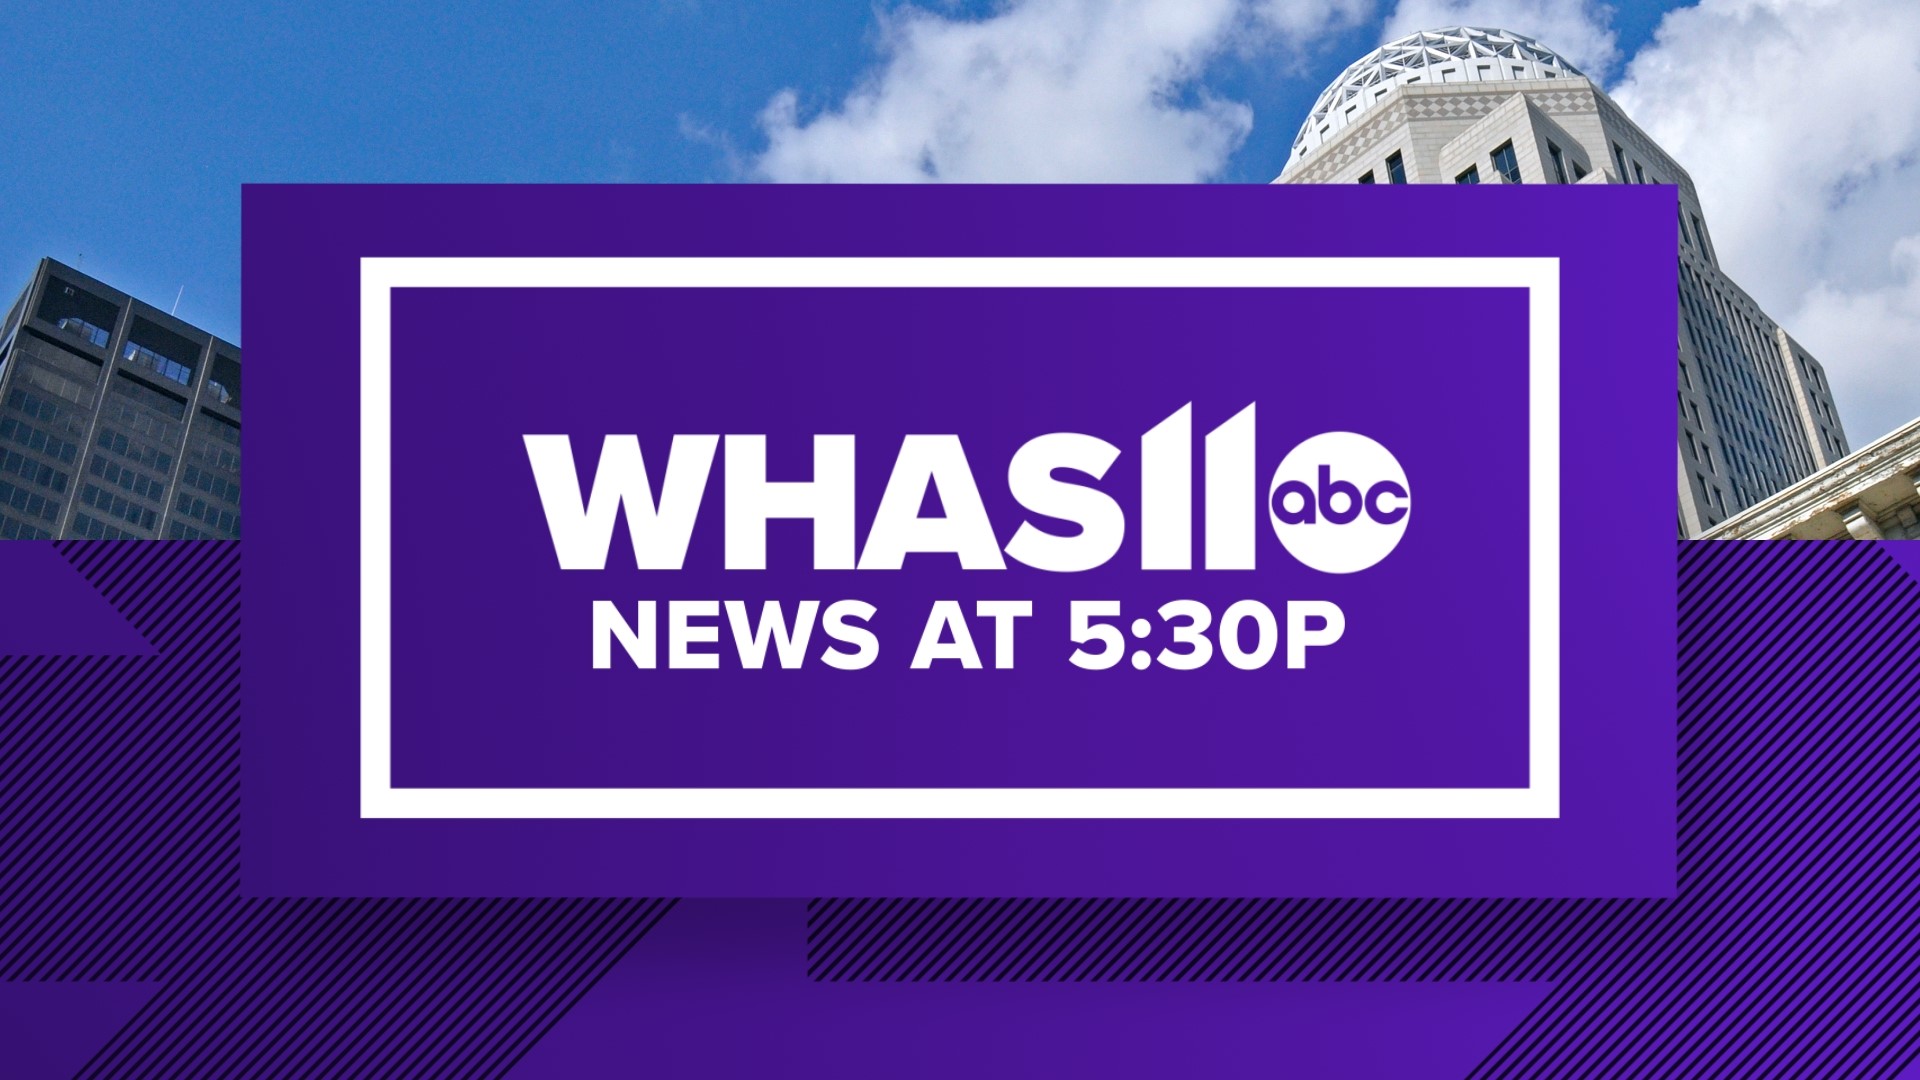 The latest local, regional and national news events are presented by the WHAS11 News Team, along with updated sports, weather and traffic.
